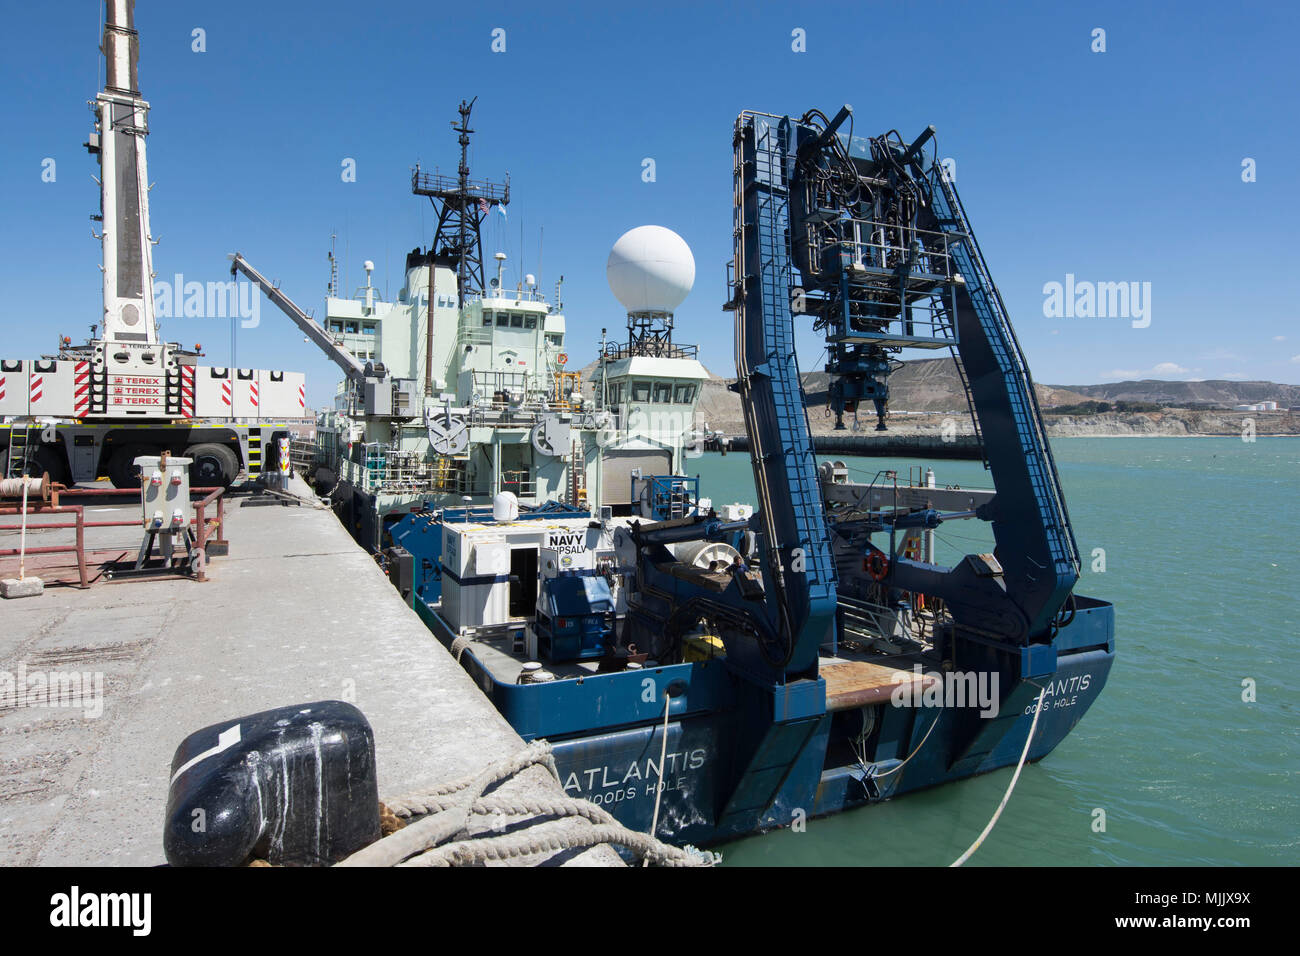 konsol tab Loaded 171204-N-HS500-003 COMODORO RIVADAVIA, Argentina (Dec. 4, 2017). The R/V  Atlantis, a U.S. Navy owned research vessel, is loaded with the  cable-controlled Undersea Recovery Vehicle (CURV-21) in Comodoro Rivadavia  Dec. 4, 2017. The